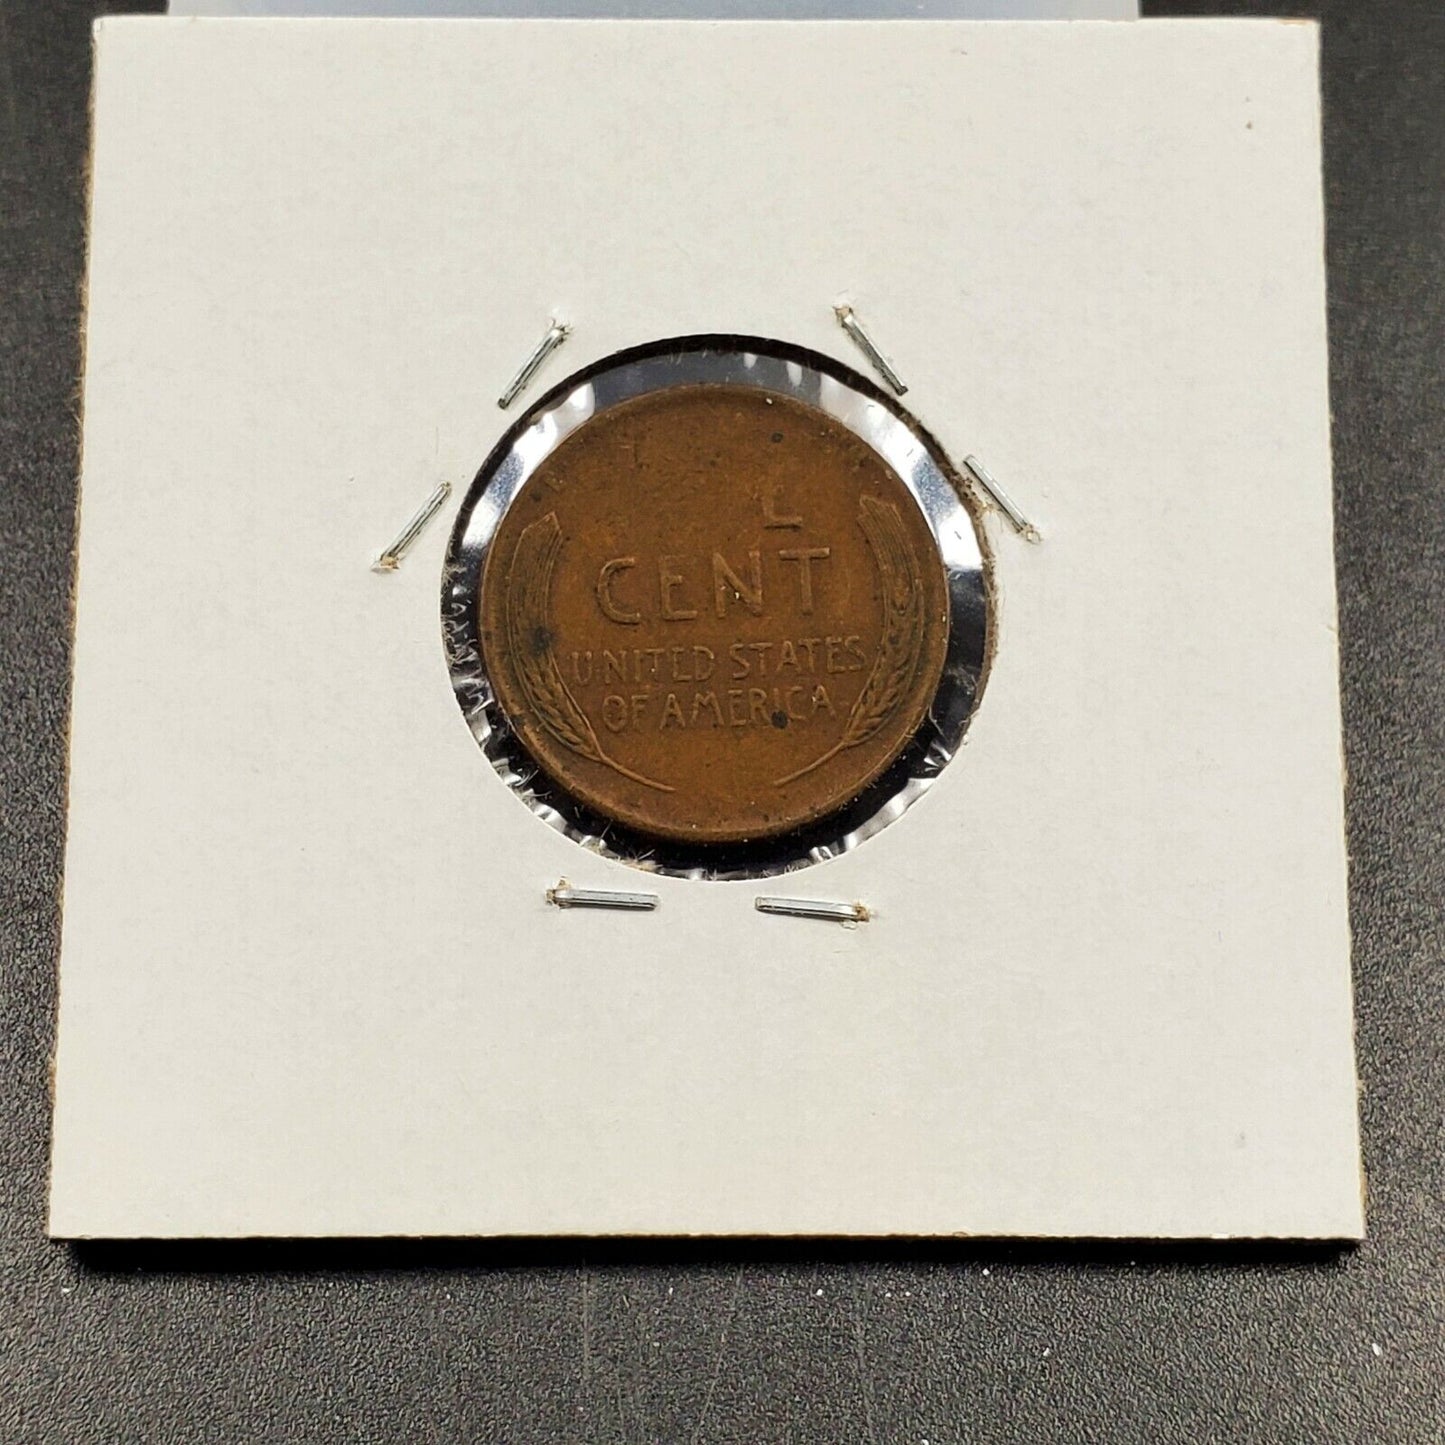 1951 P Lincoln Wheat Cent Error Coin Tapered Planchet